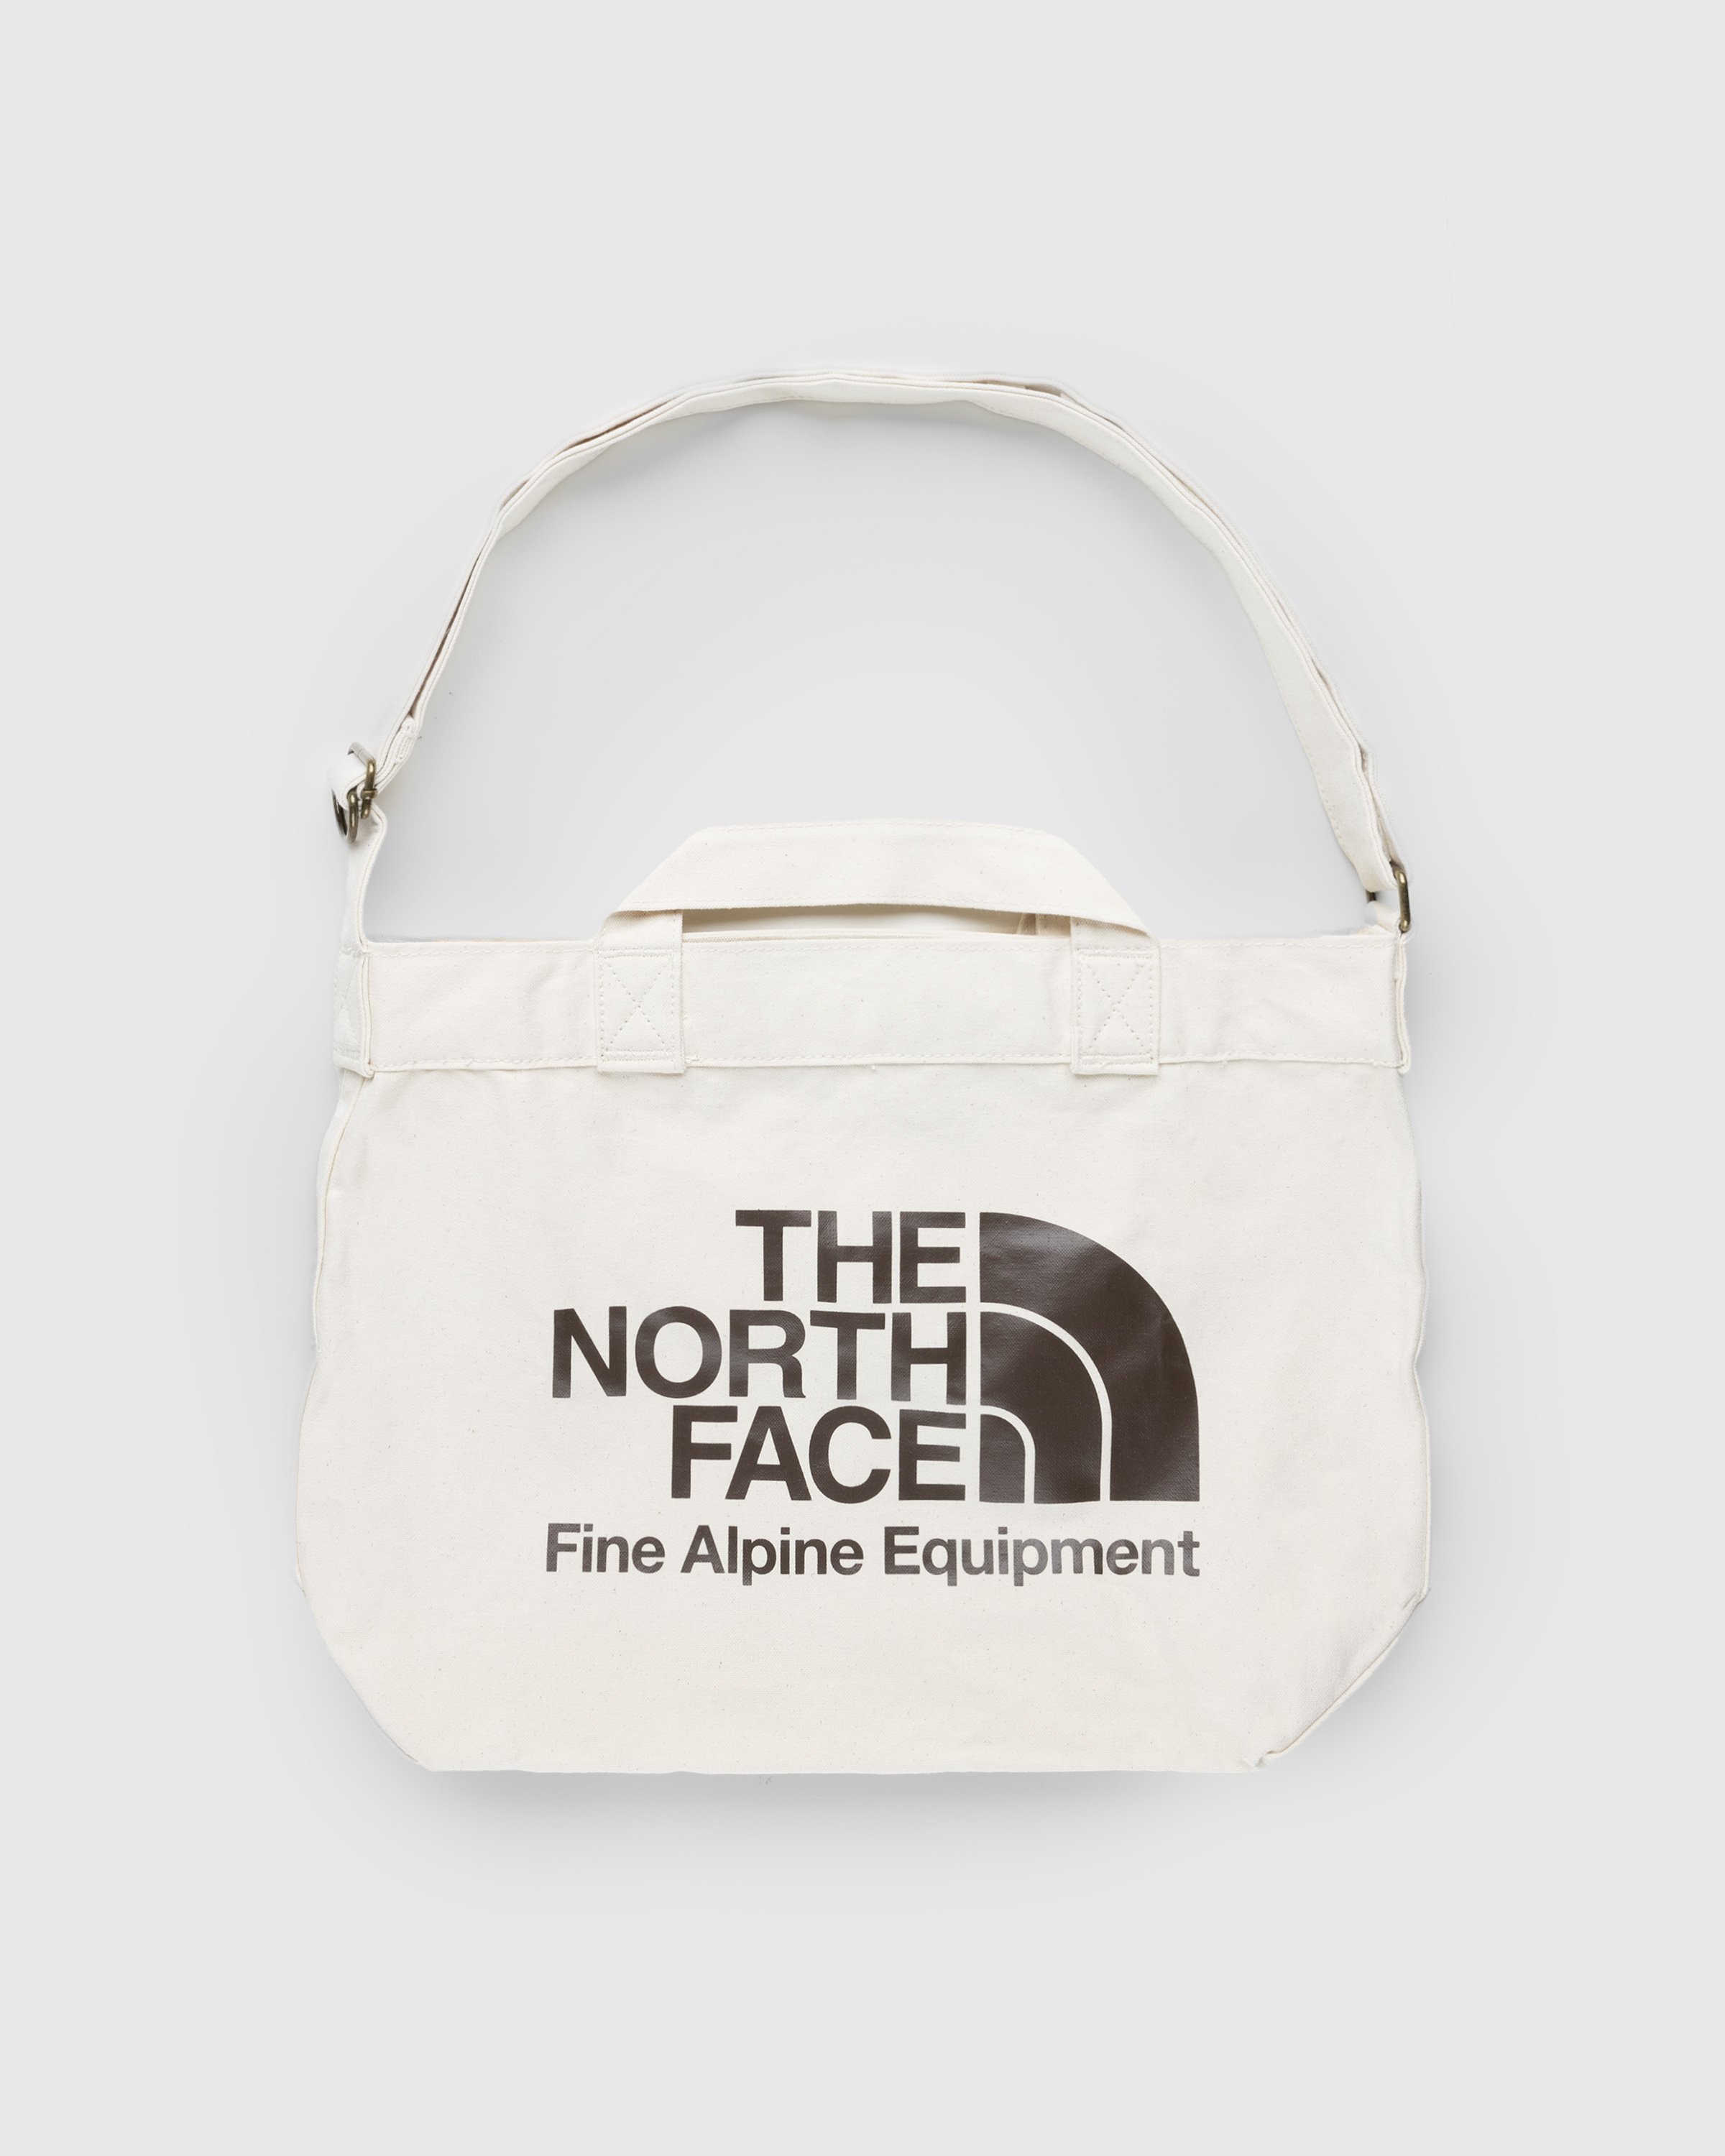 The North Face - Adjustable Cotton Tote Bag Beige - Accessories - Multi - Image 1